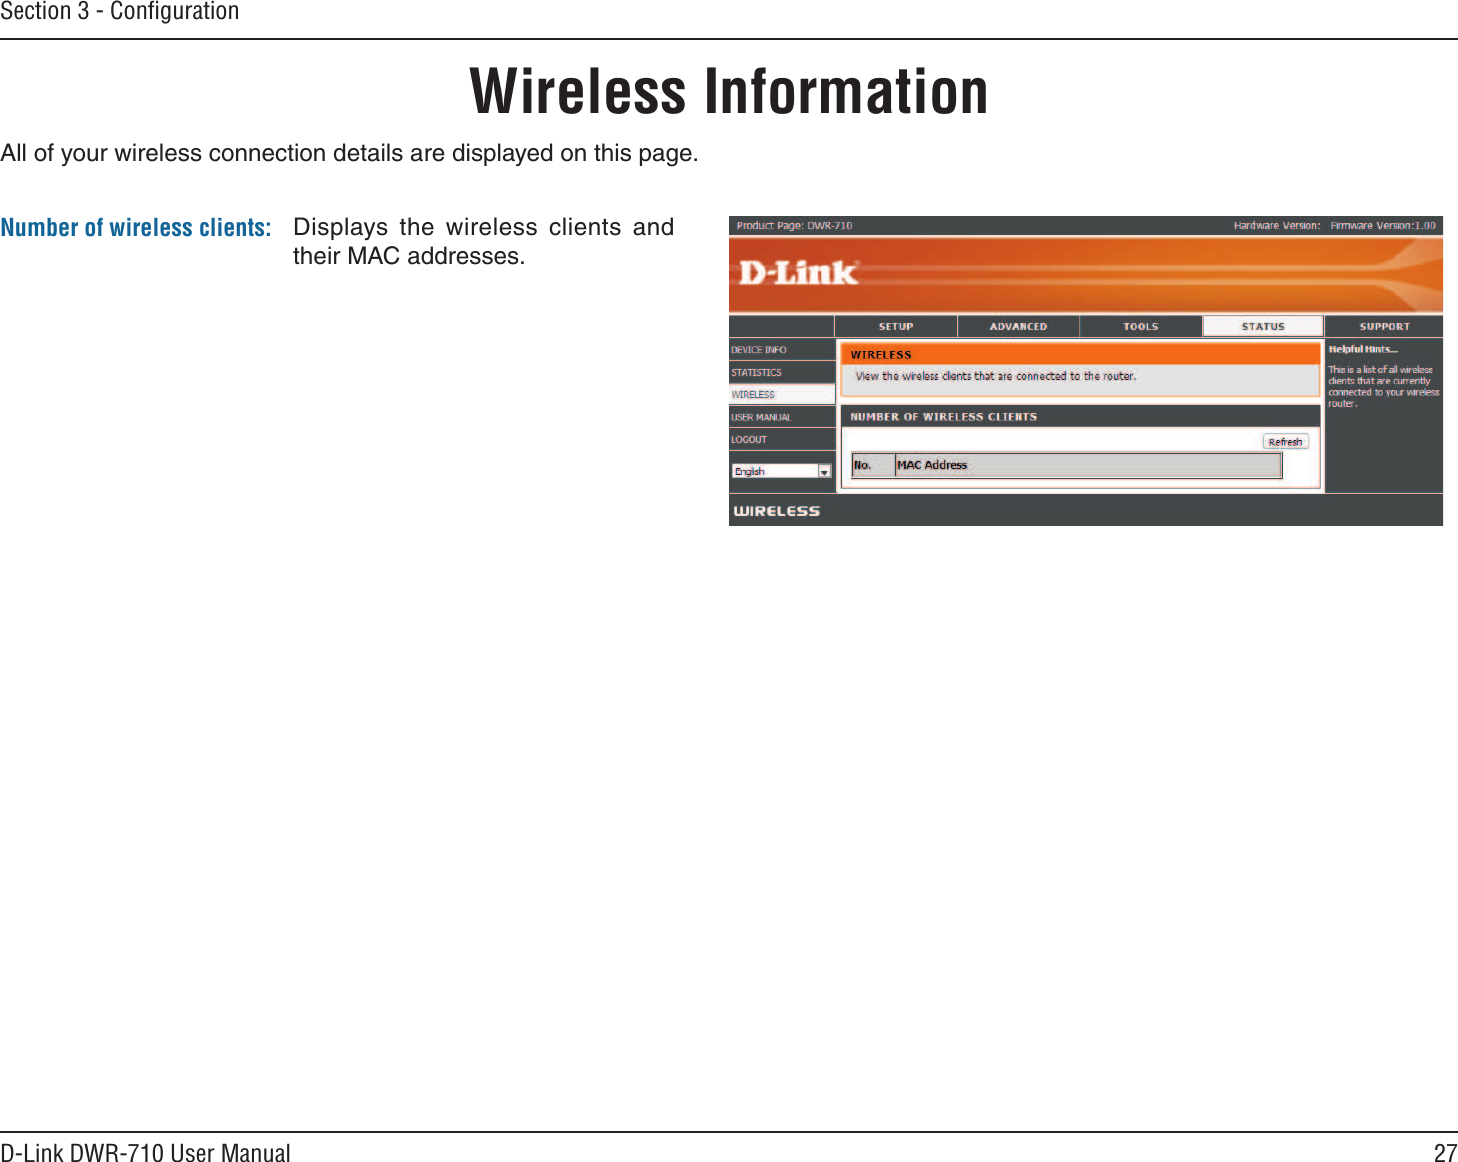 27D-Link DWR-710 User ManualSection 3 - ConﬁgurationWireless InformationAll of your wireless connection details are displayed on this page.Displays  the  wireless  clients  and their MAC addresses.Number of wireless clients: